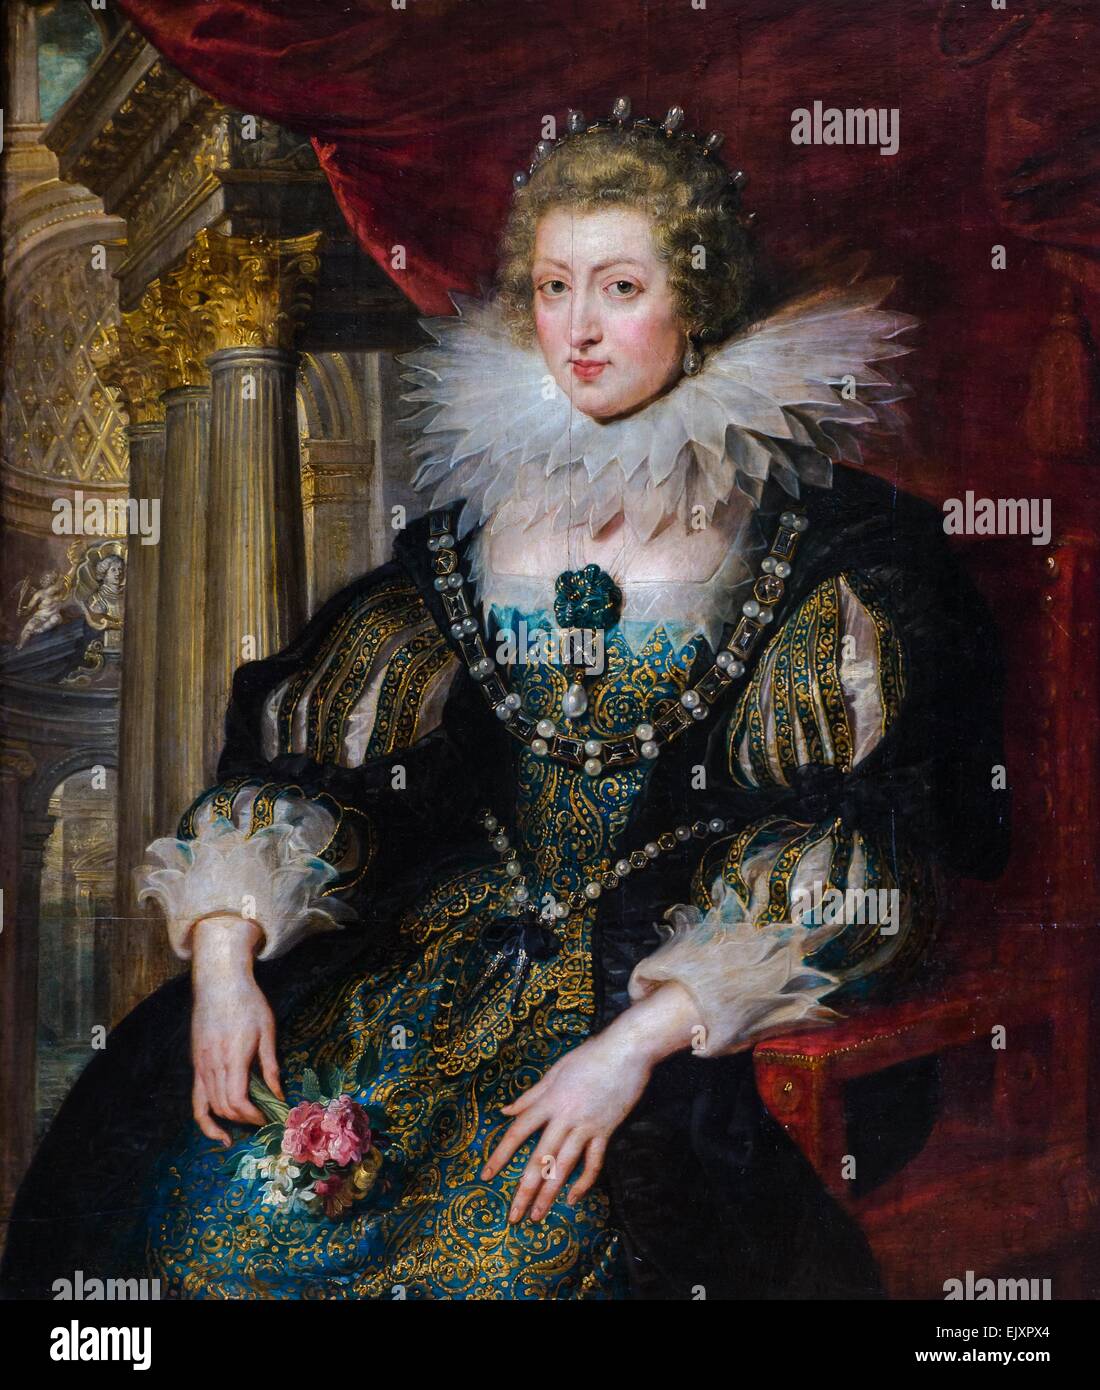 ActiveMuseum 0001957.jpg / Anne of Austria, Queen consort of King Louis XIII of France, mother of Louis XIV, ca 1620 - by Rubens Oil on canvas 26/09/2013  -   / 17th century Collection / Active Museum Stock Photo